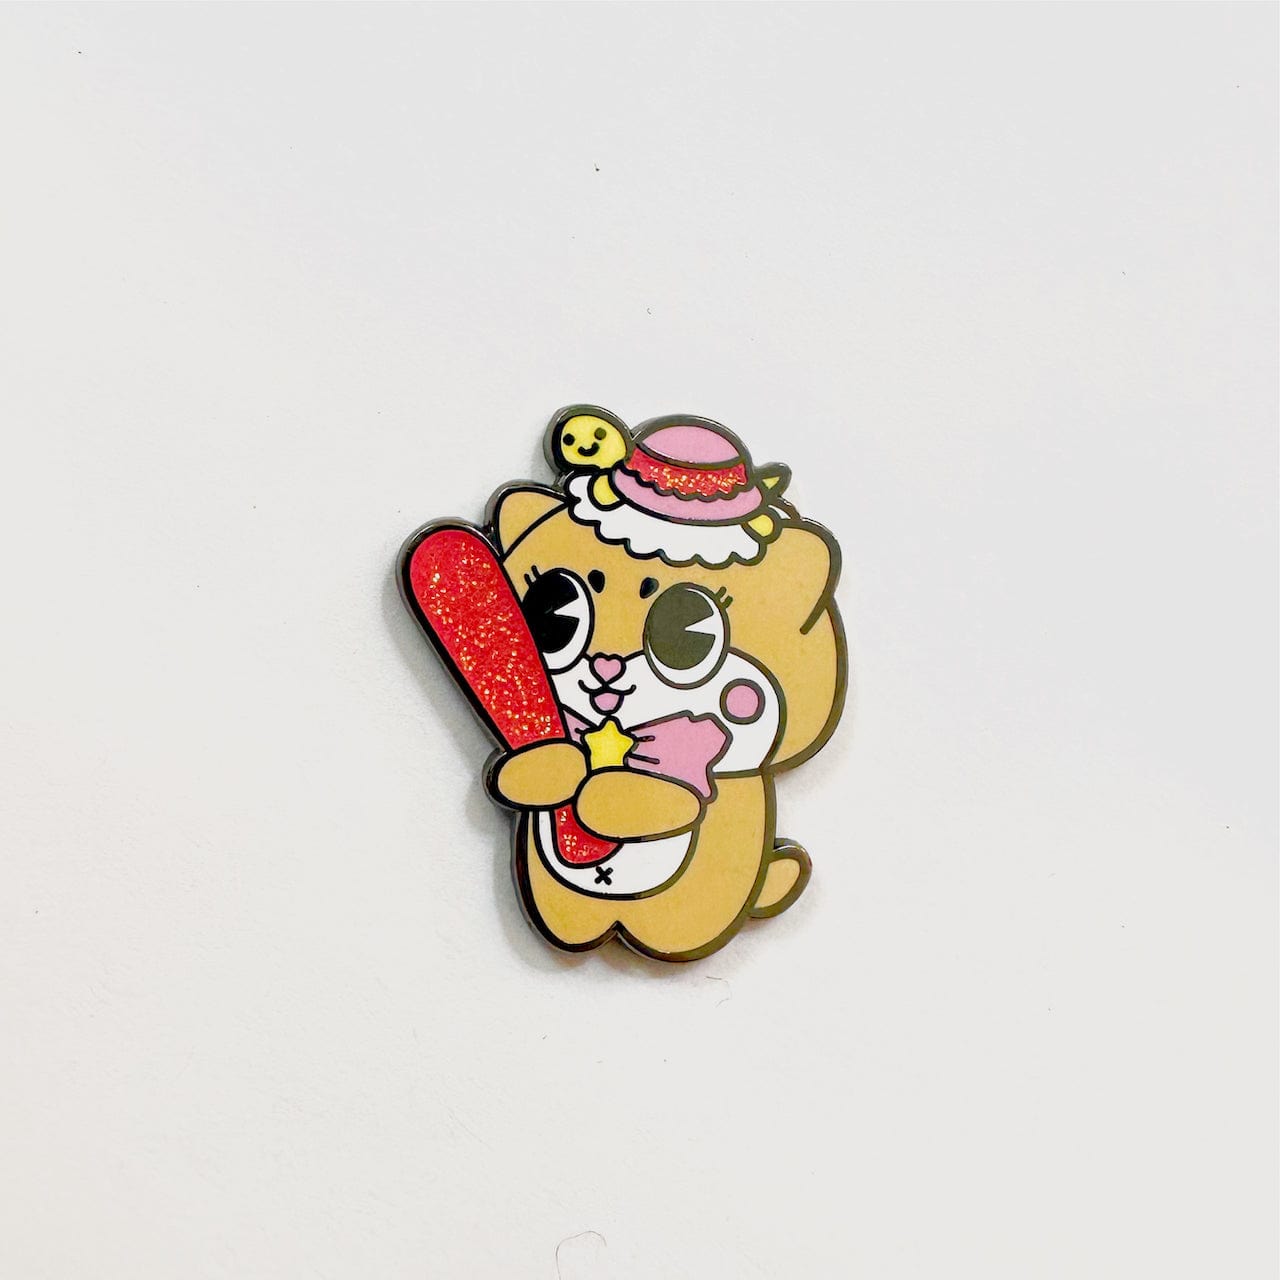 Pinbuds Enamel pin Chaotic destructive otter pin - Chiitan from Kochi prefecture (Japan Mascot collection)